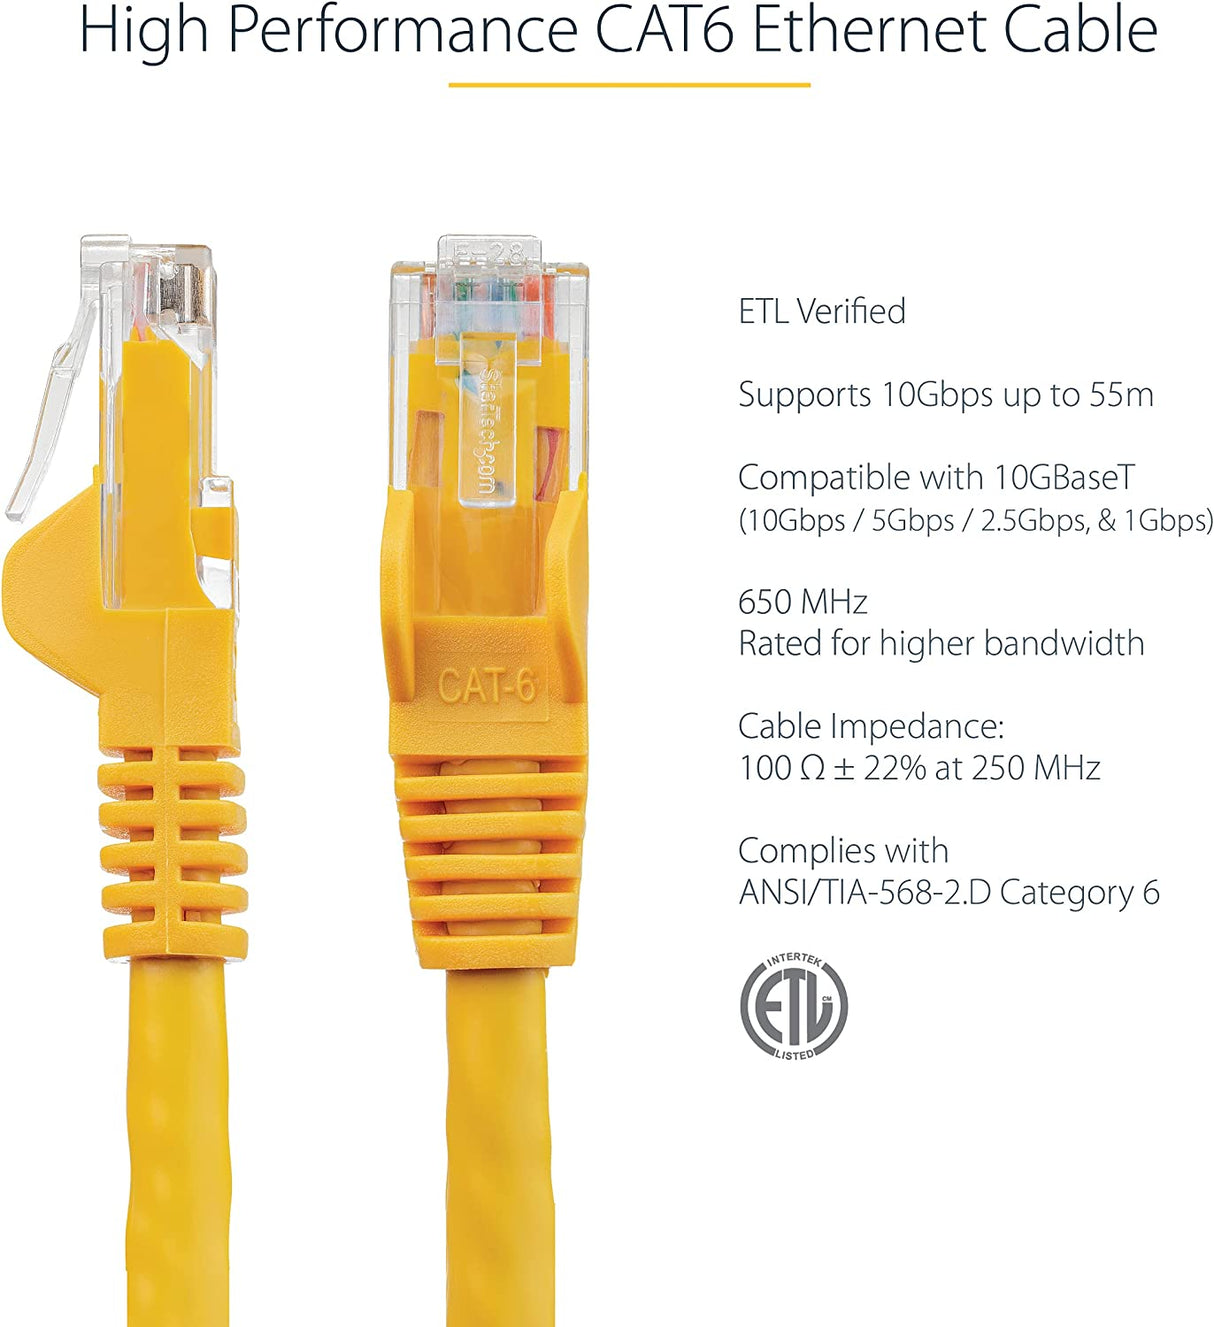 StarTech.com 7ft CAT6 Ethernet Cable - Yellow CAT 6 Gigabit Ethernet Wire -650MHz 100W PoE RJ45 UTP Network/Patch Cord Snagless w/Strain Relief Fluke Tested/Wiring is UL Certified/TIA (N6PATCH7YL) Yellow 7 ft / 2.1 m 1 Pack